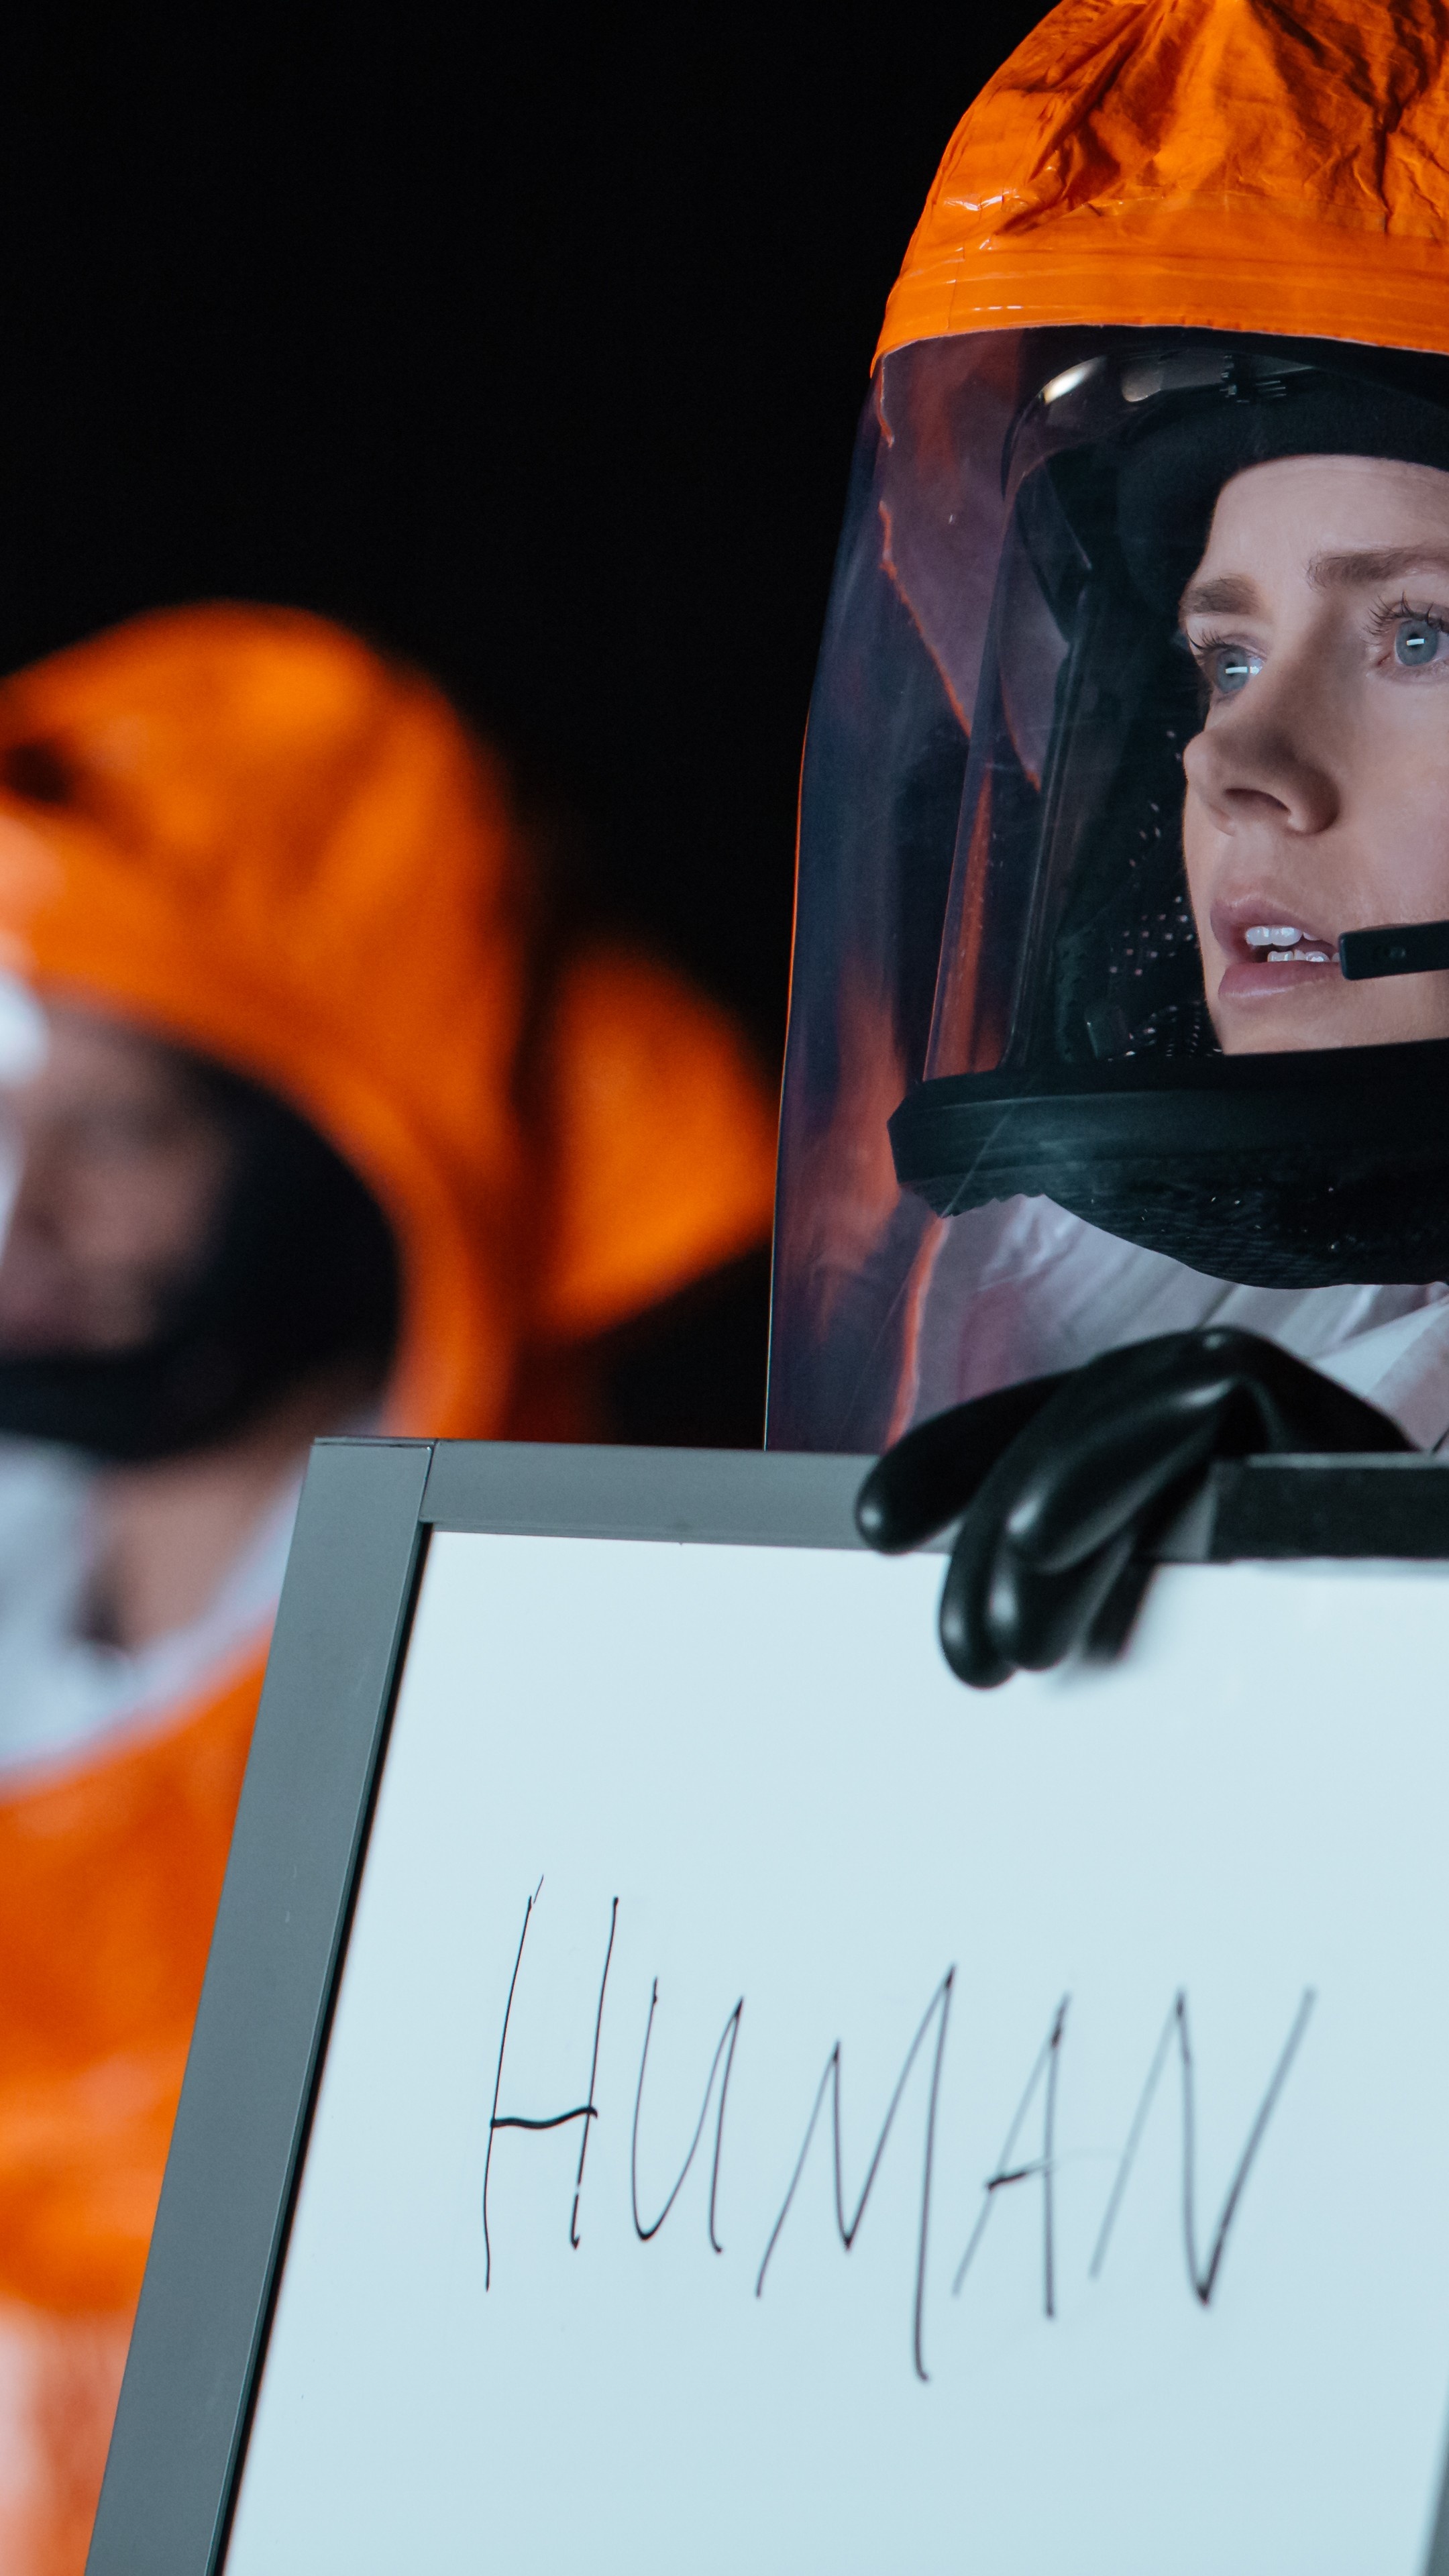 Arrival (Movie): Amy Adams, Louise Banks, A linguist enlisted by the United States Army to discover how to communicate with extraterrestrials who have arrived on Earth before tensions lead to war. 2160x3840 4K Wallpaper.